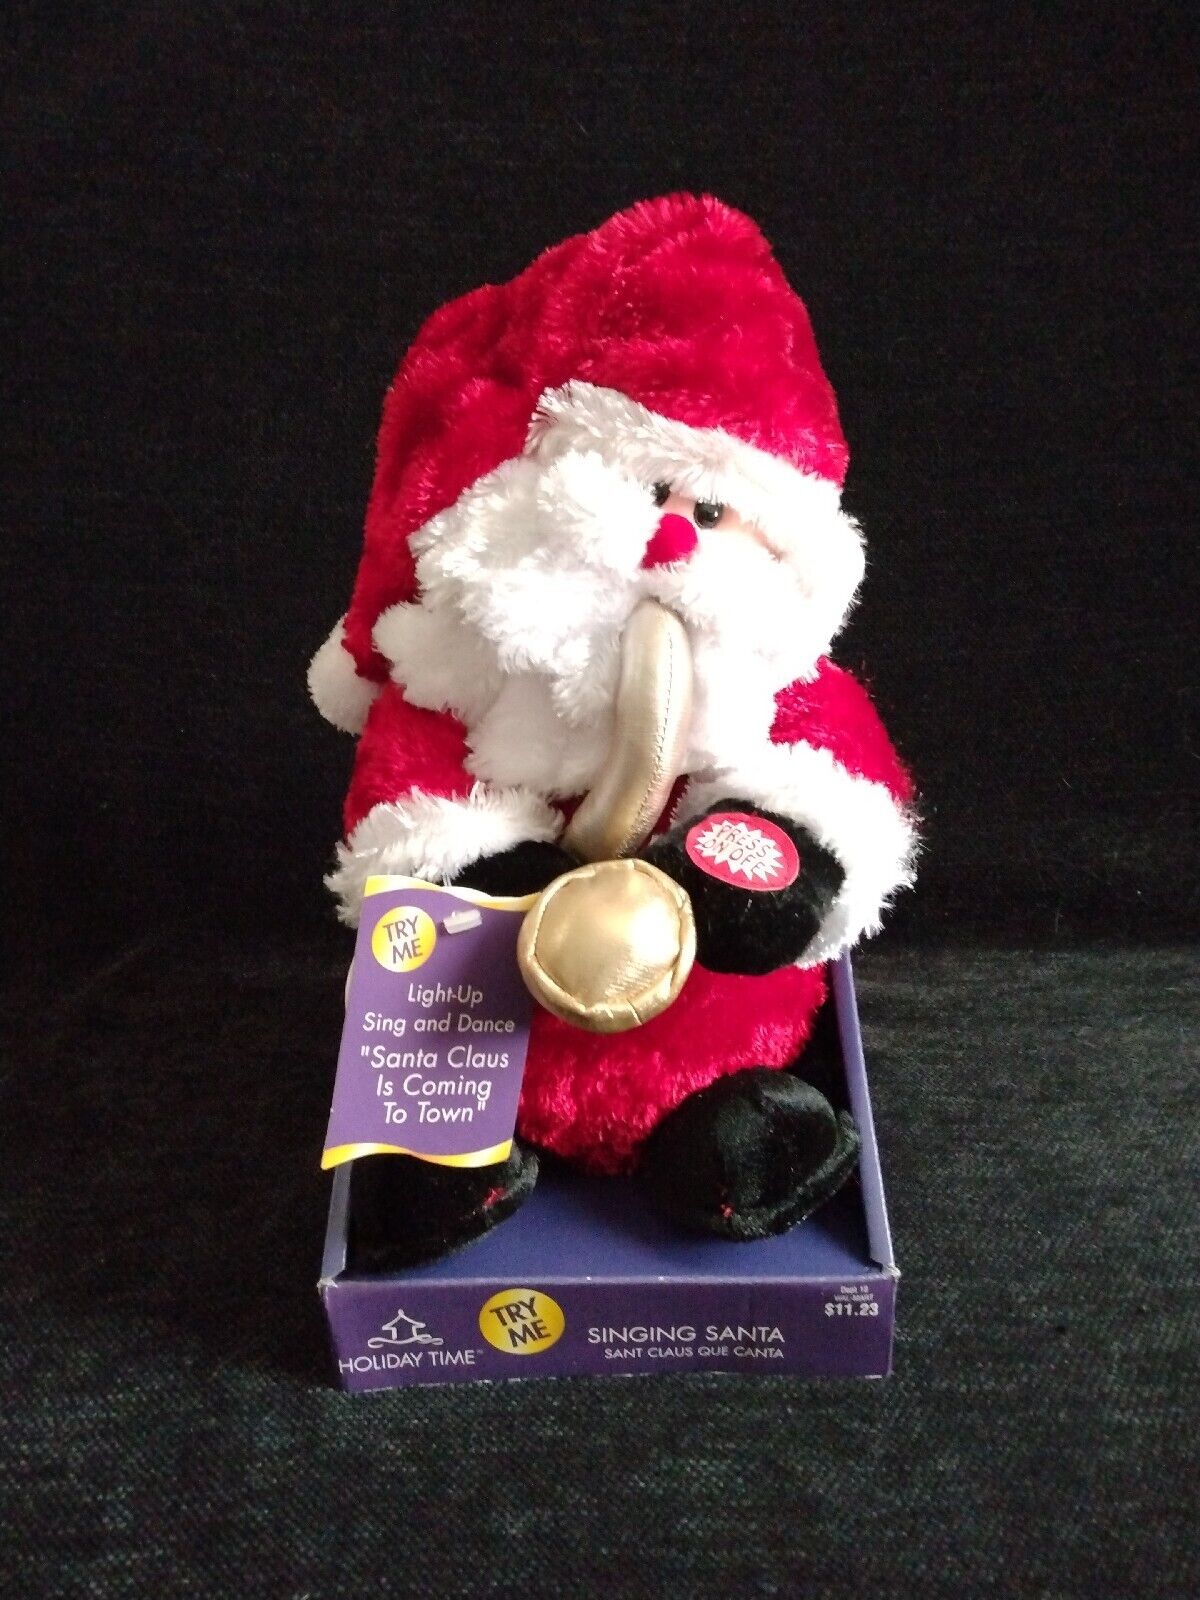 DanDee Light Up Sing and Dance Santa Claus Is Coming Saxophone Tags & Box WORKS